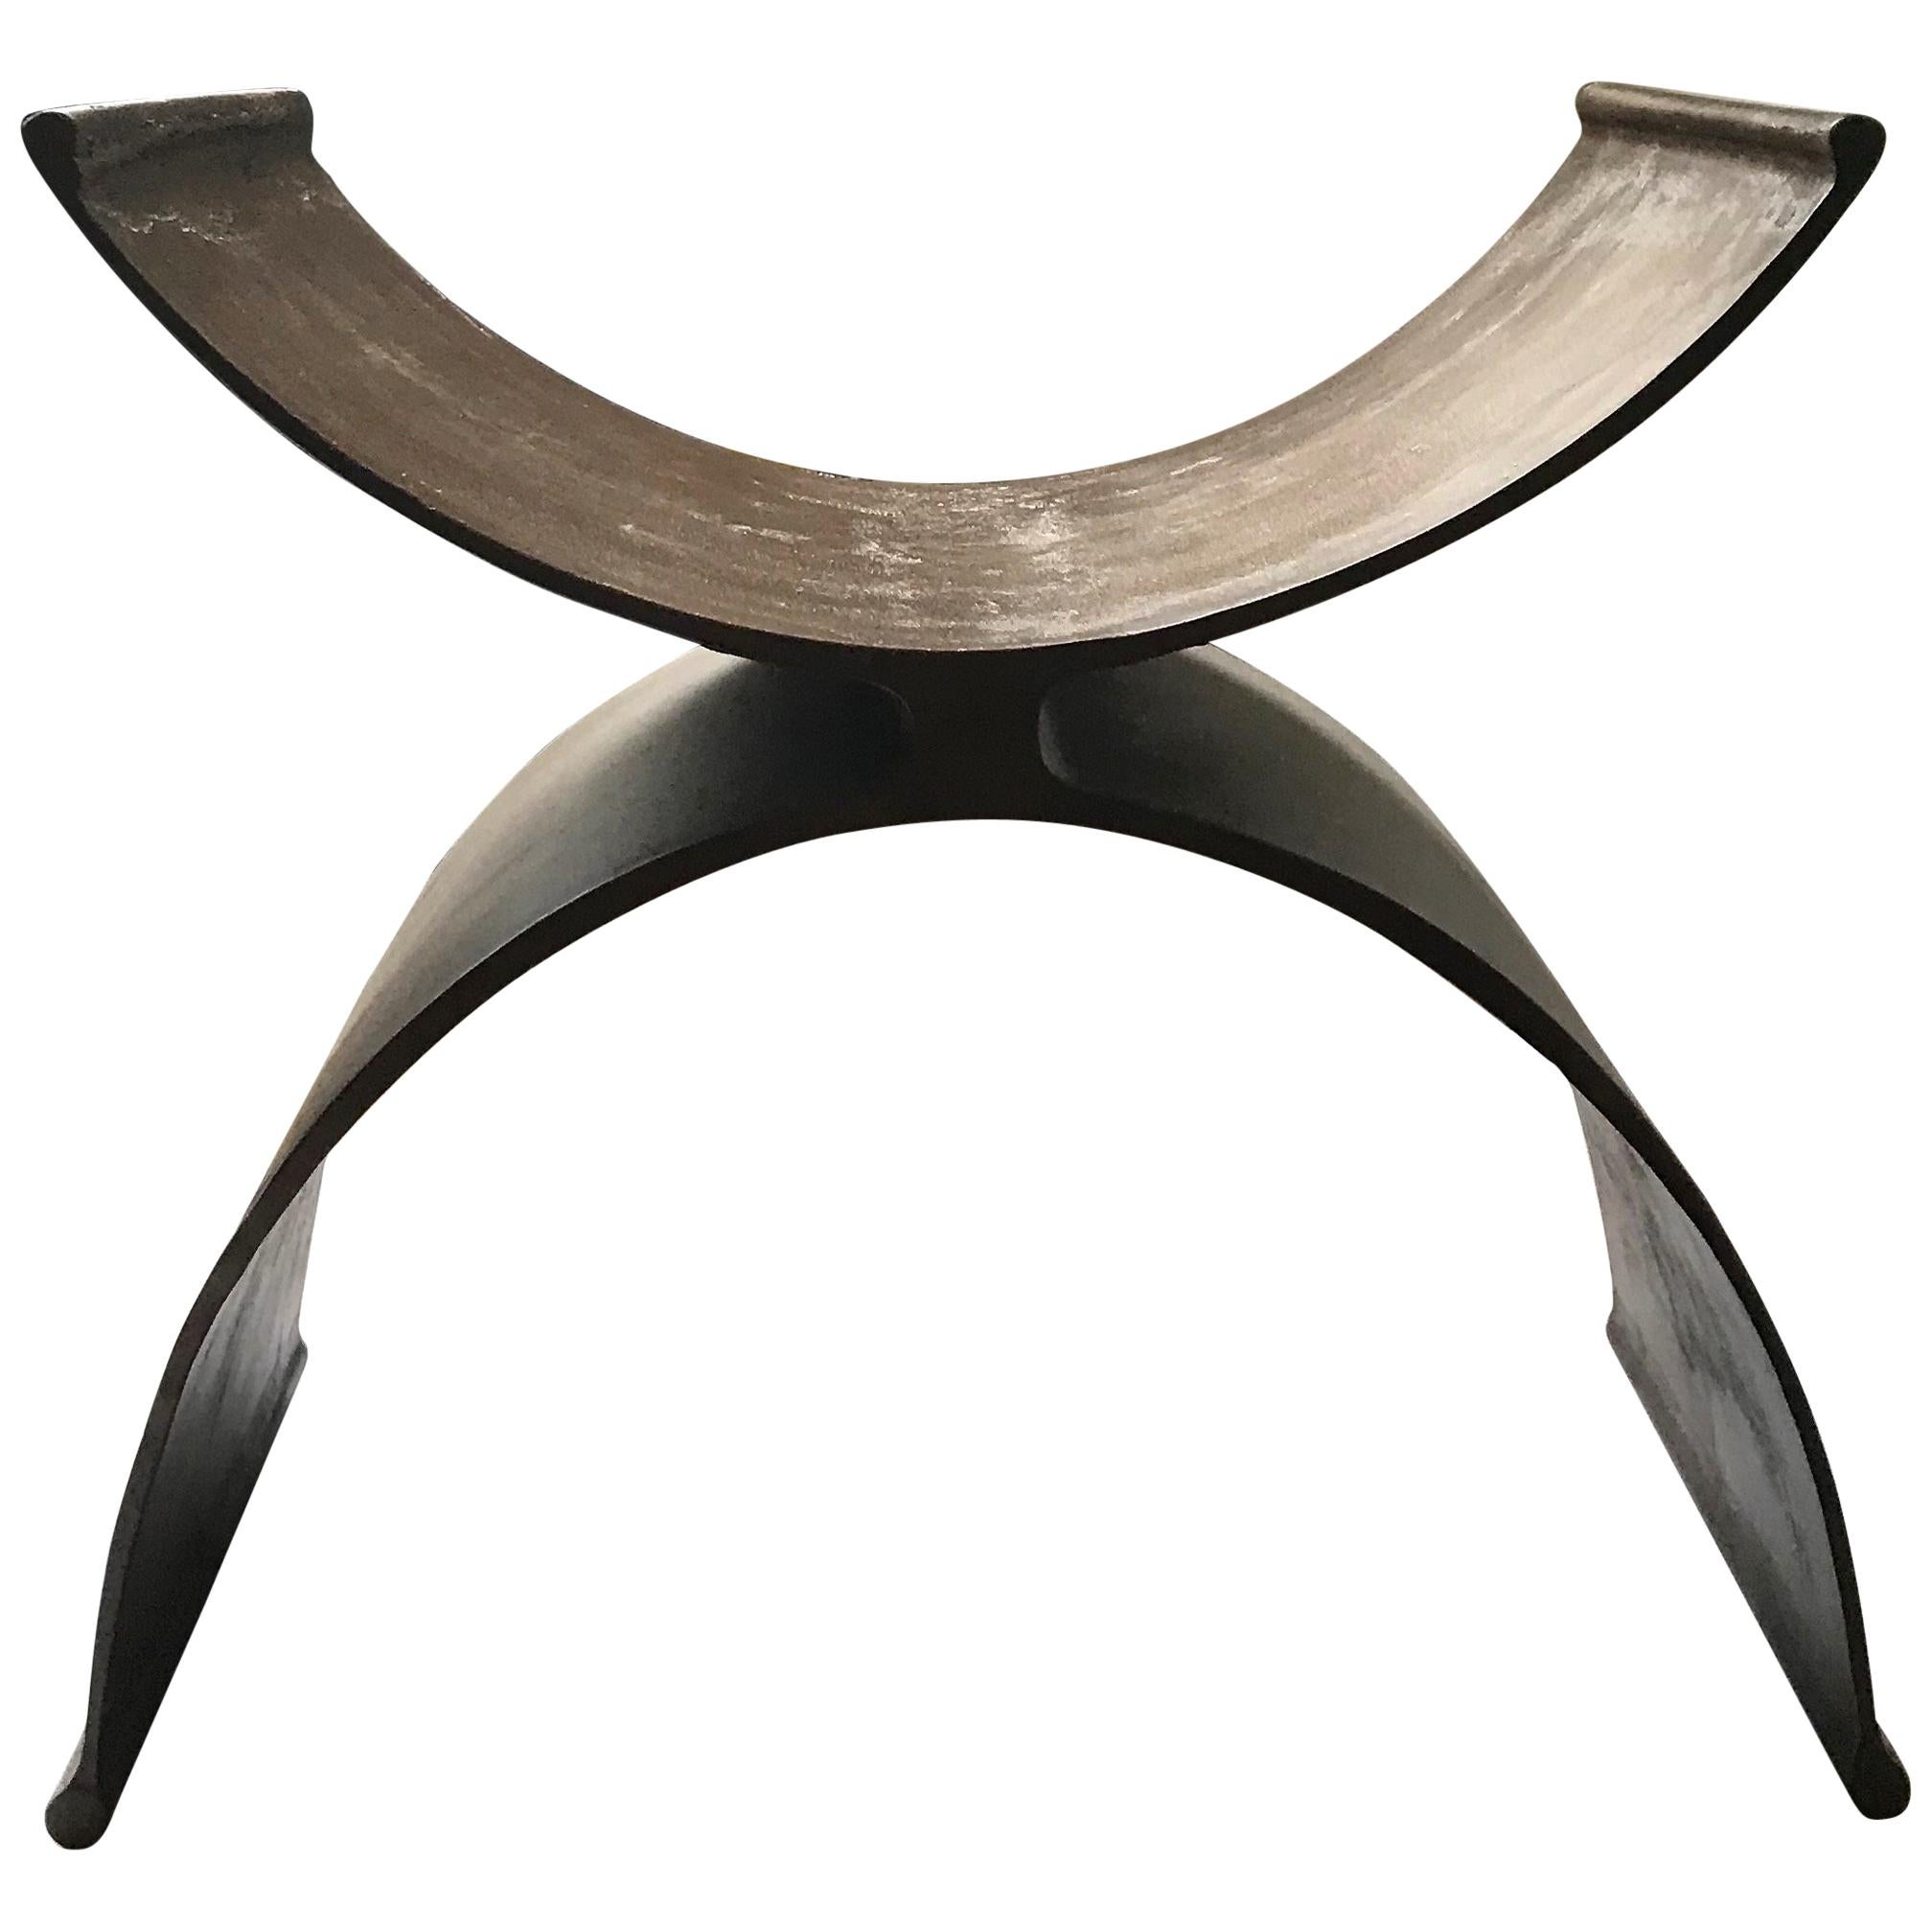 21st Century Reflection Stool by Michael Del Piero -Rusty Finish Aluminum  For Sale